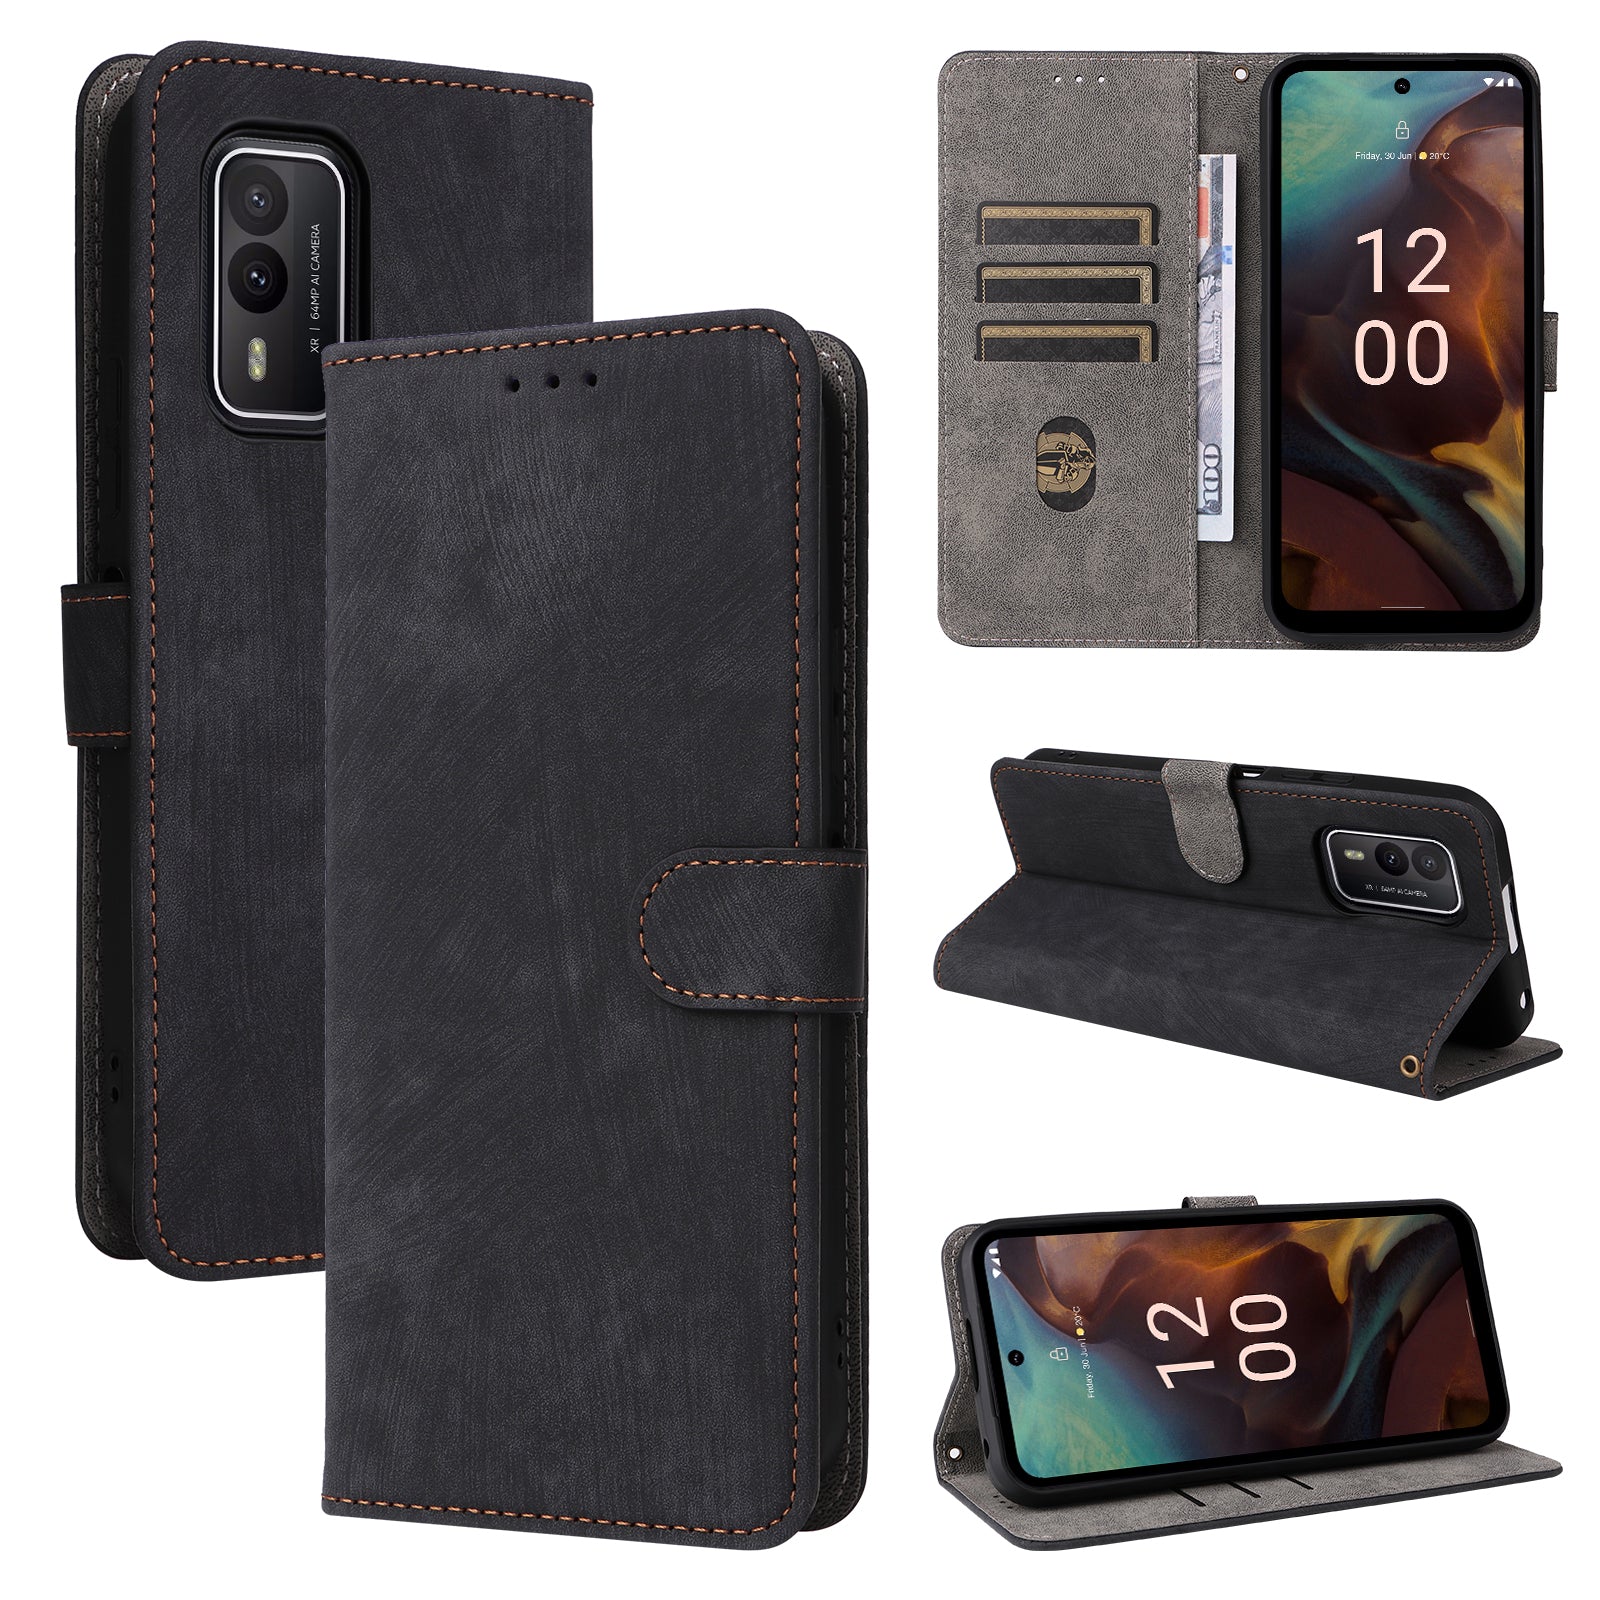 Uniqkart for Nokia XR21 RFID Blocking Phone Cover Wallet Stand Shell Shockproof Leather Case - Black